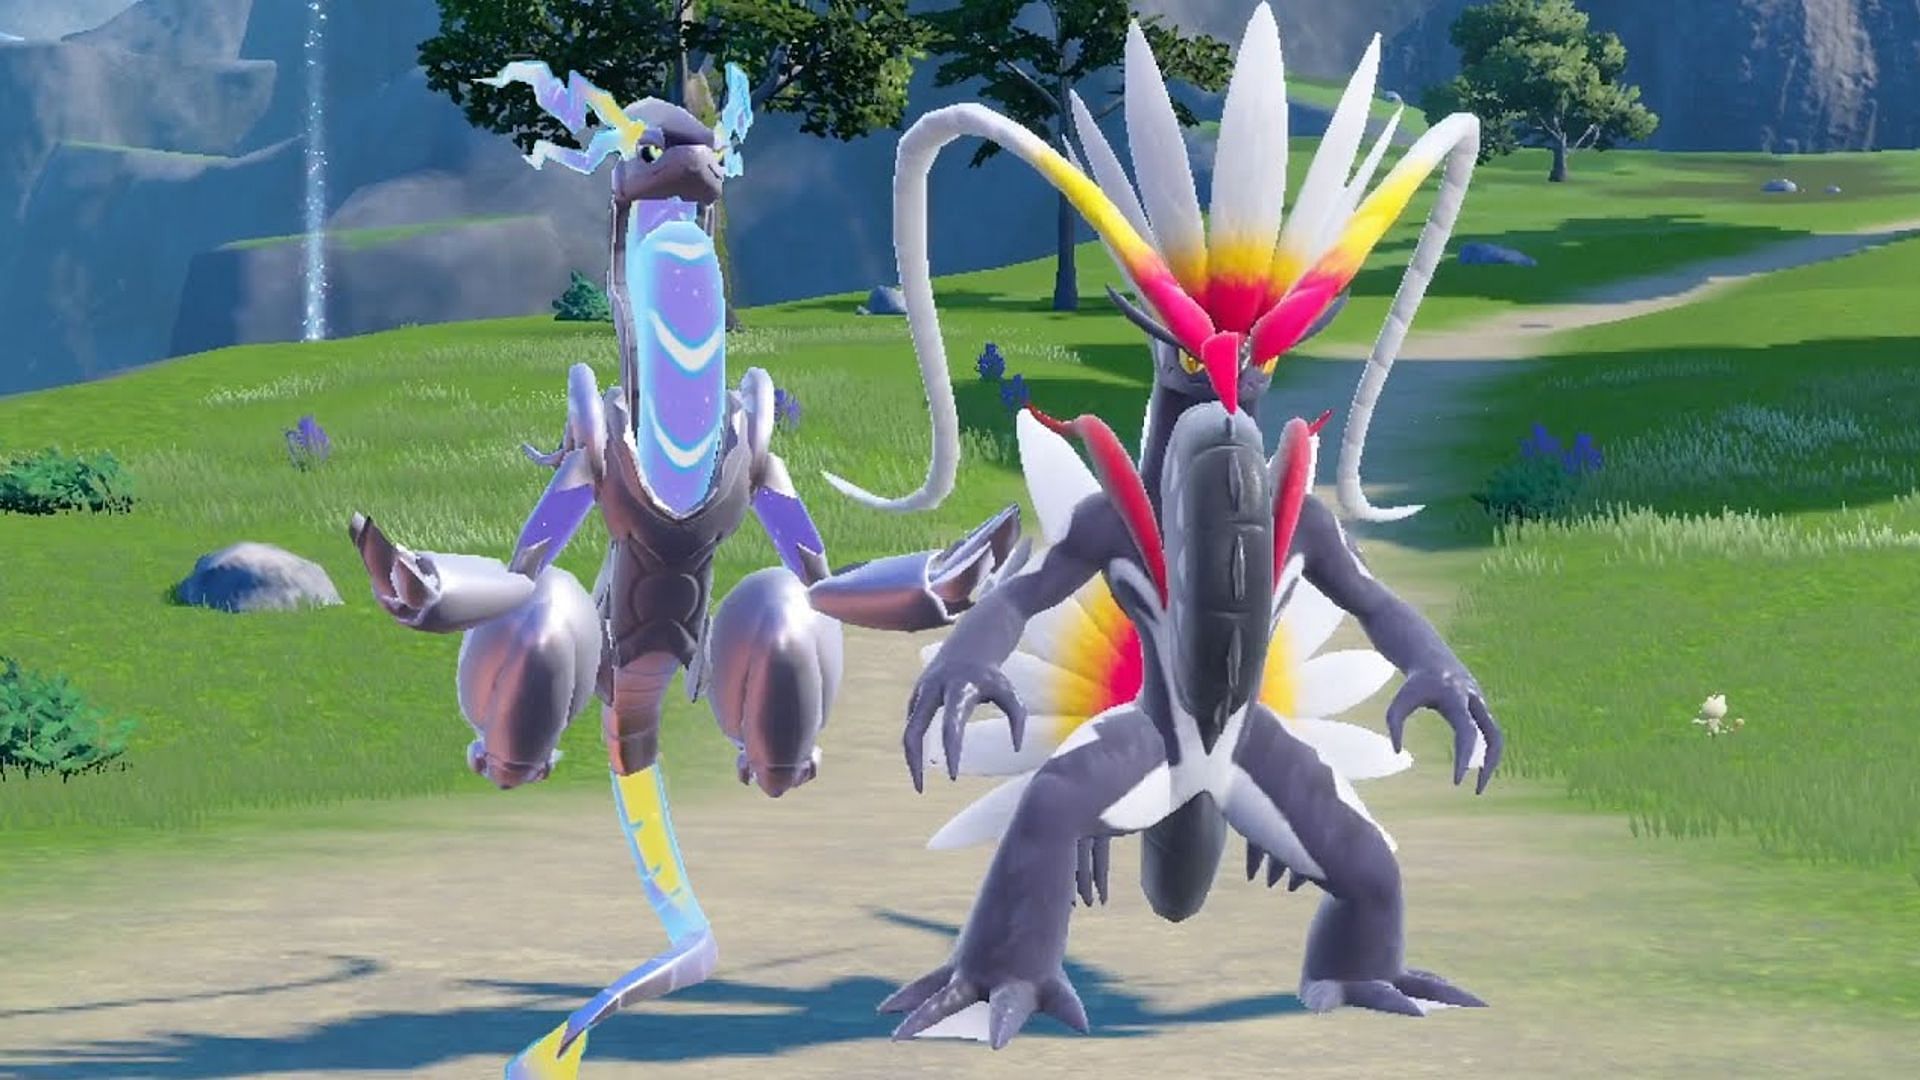 All of the Shiny-Locked Pokémon in 'Scarlet' and 'Violet